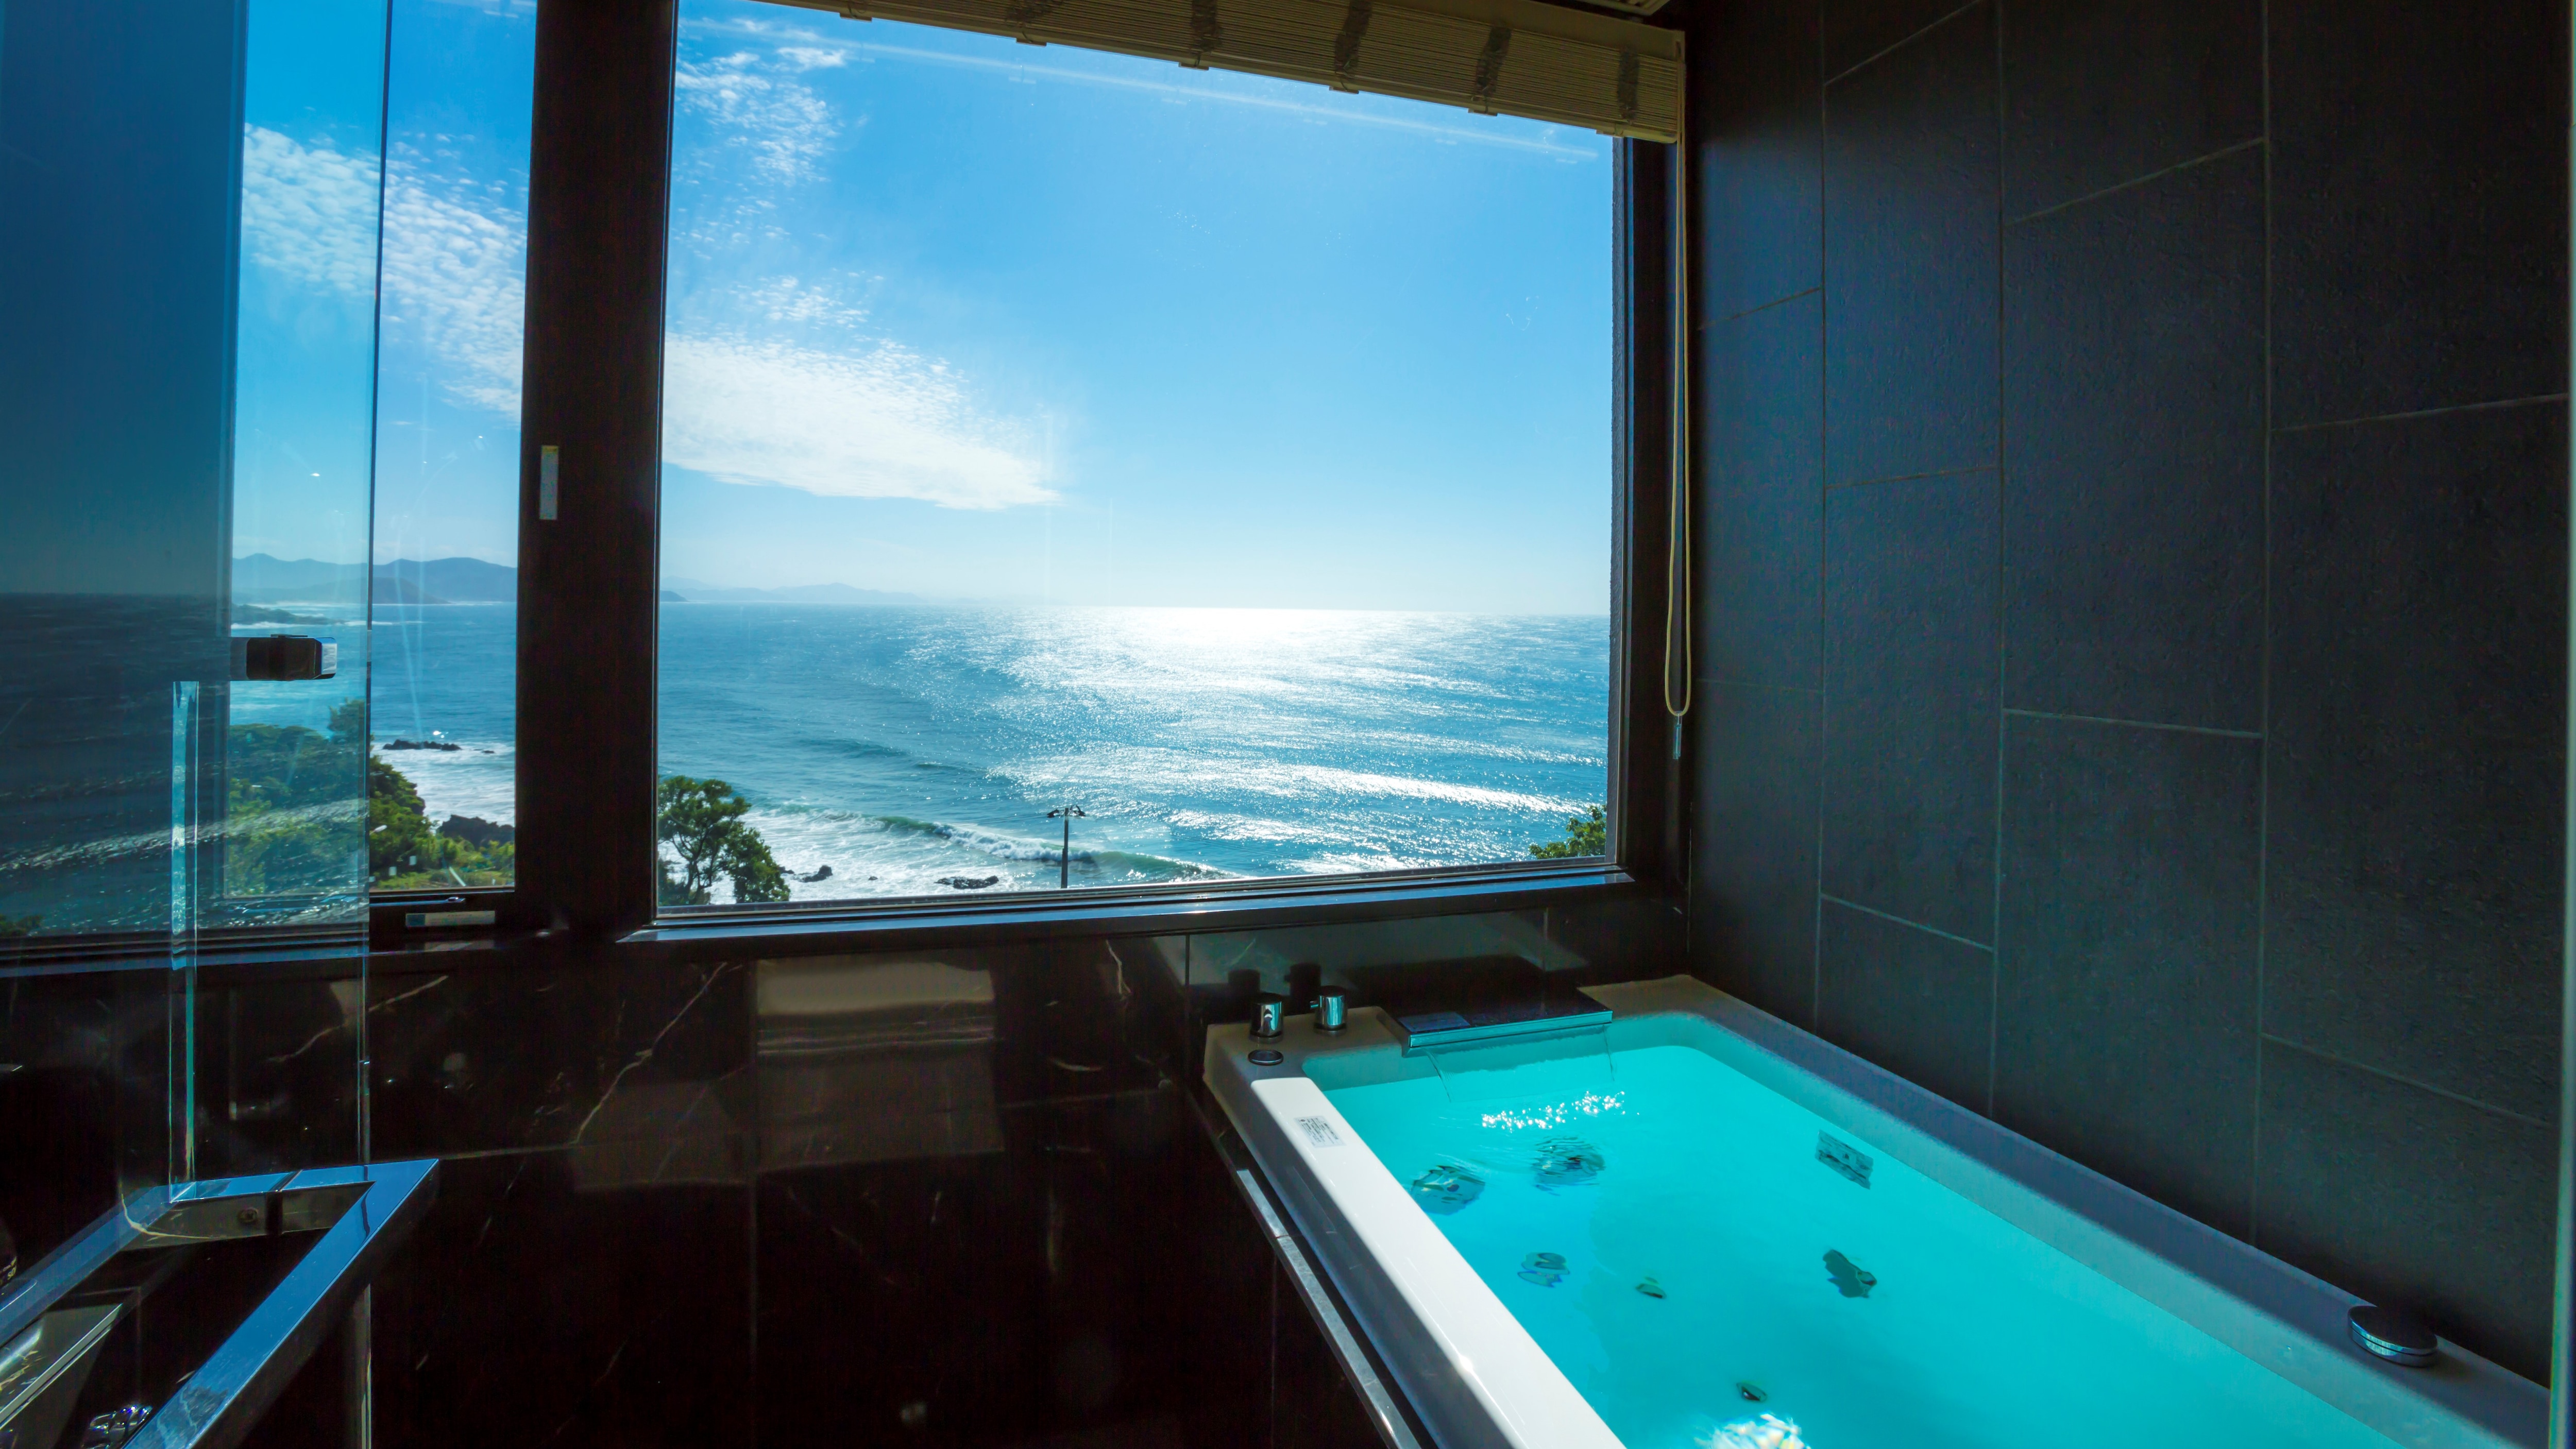 [302 / Amami] You can overlook the beautiful sea from the guest room observation bath with ocean view.